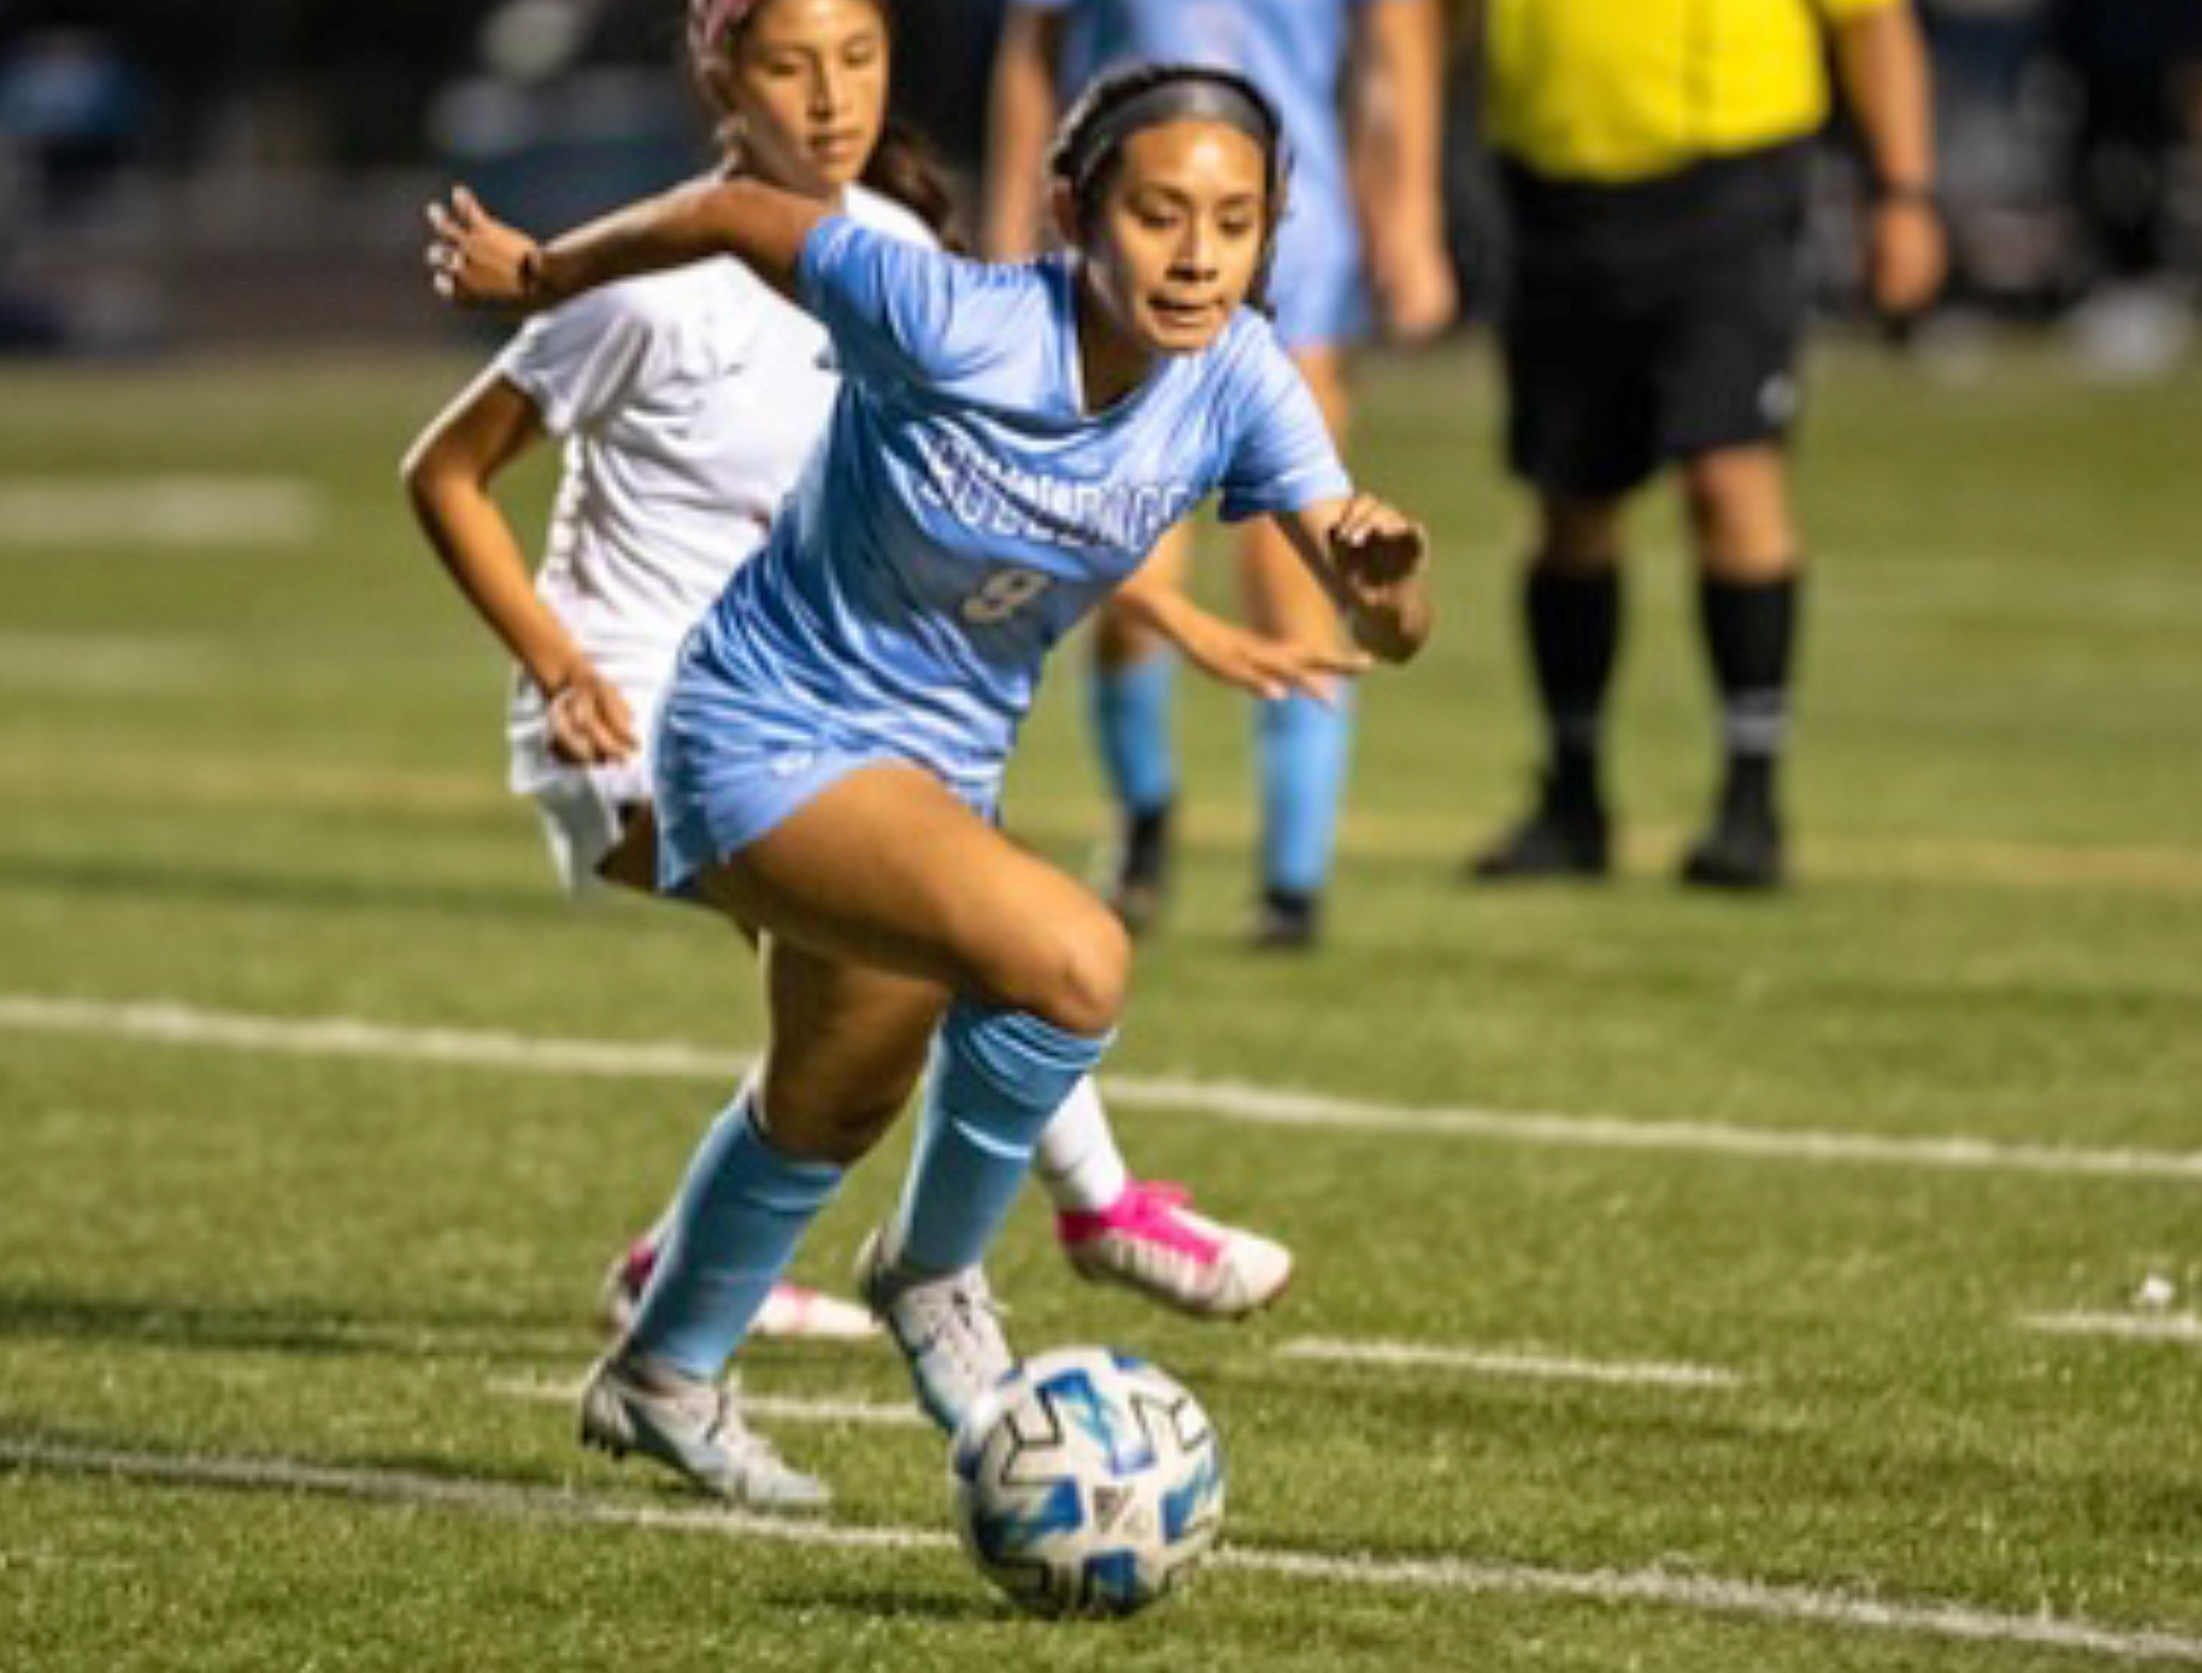 esmerelda hernandez chases a loose ball during a high school game